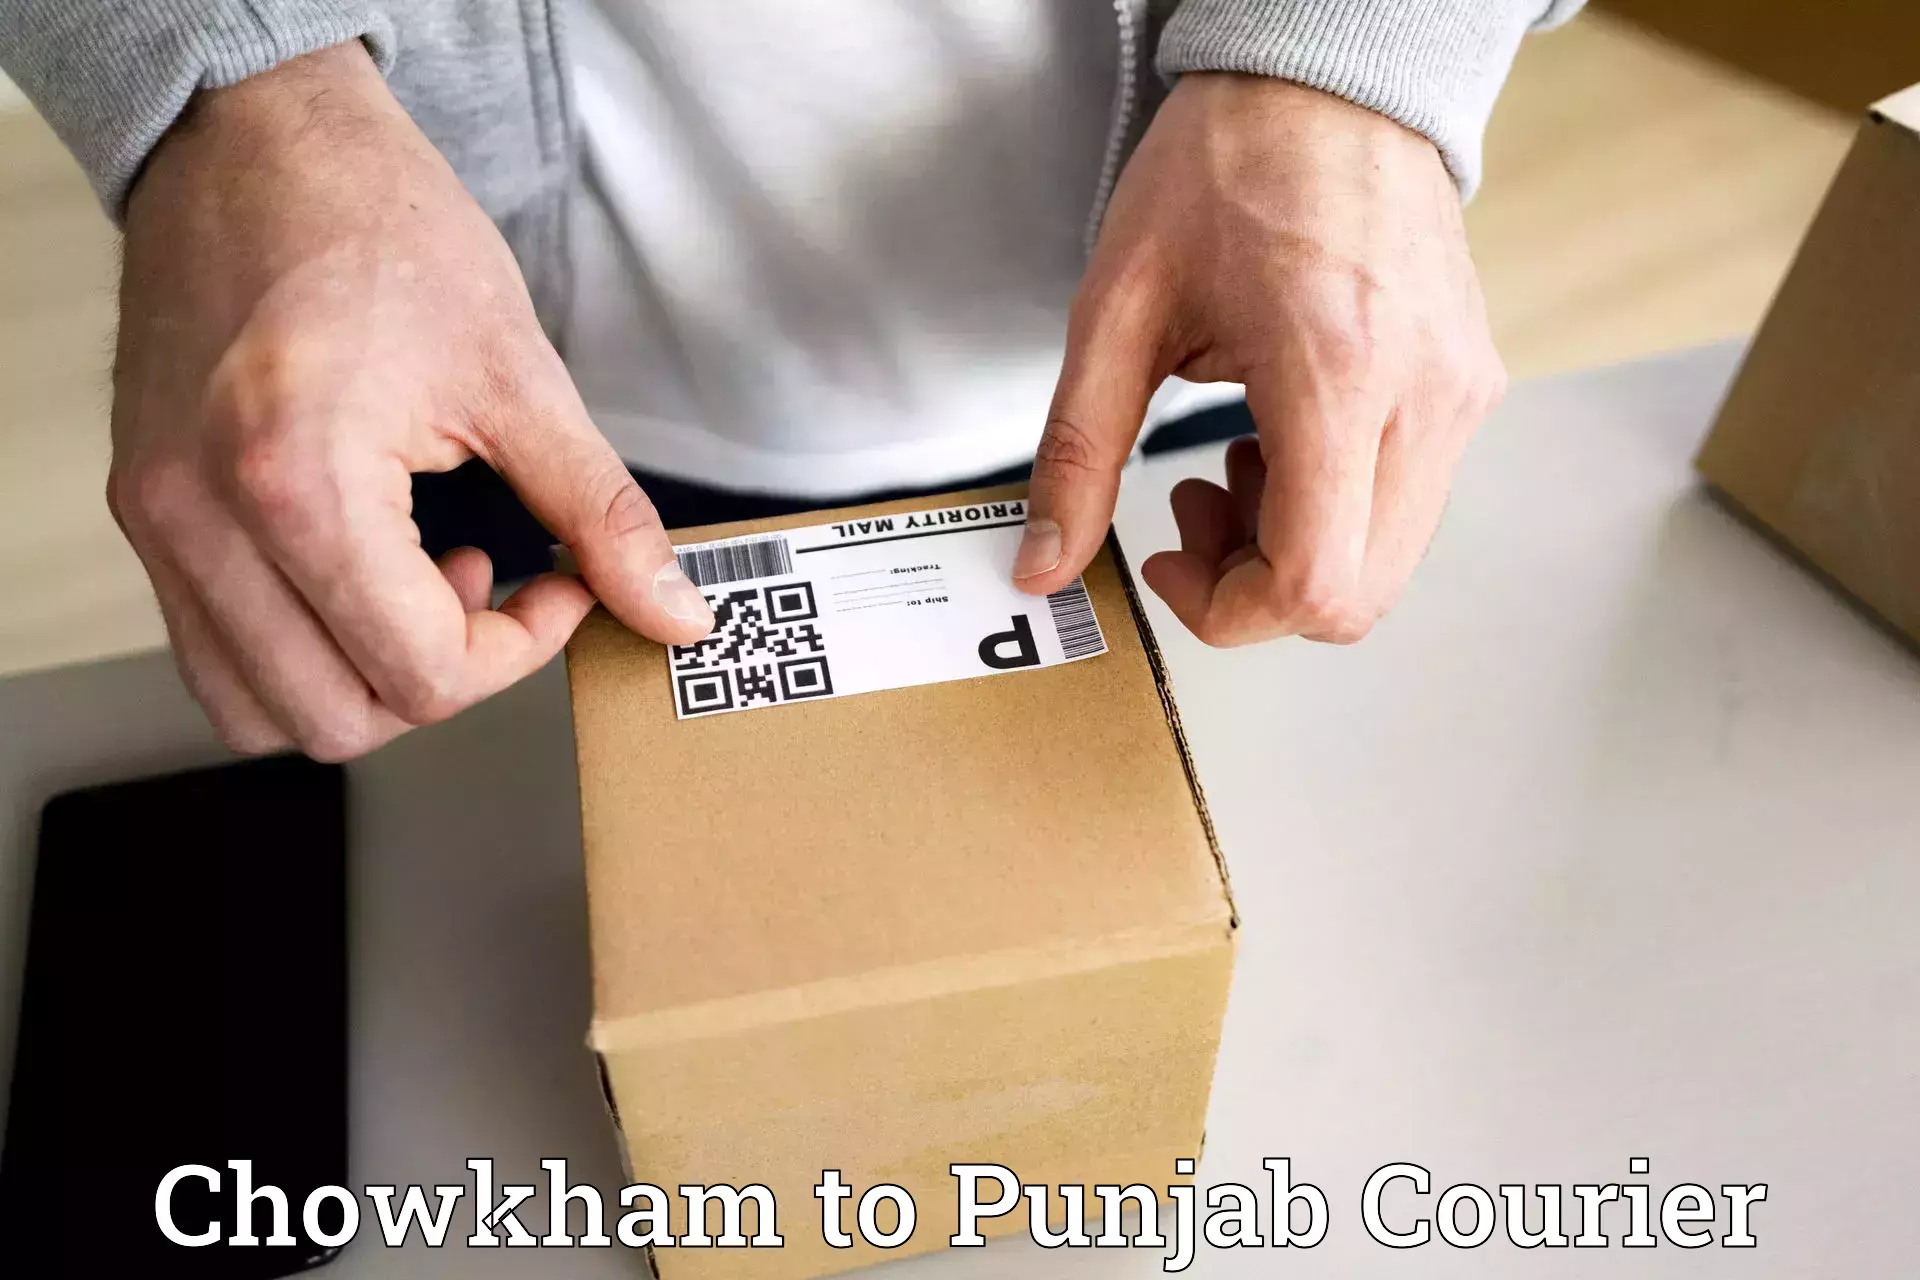 Remote area delivery Chowkham to Punjab